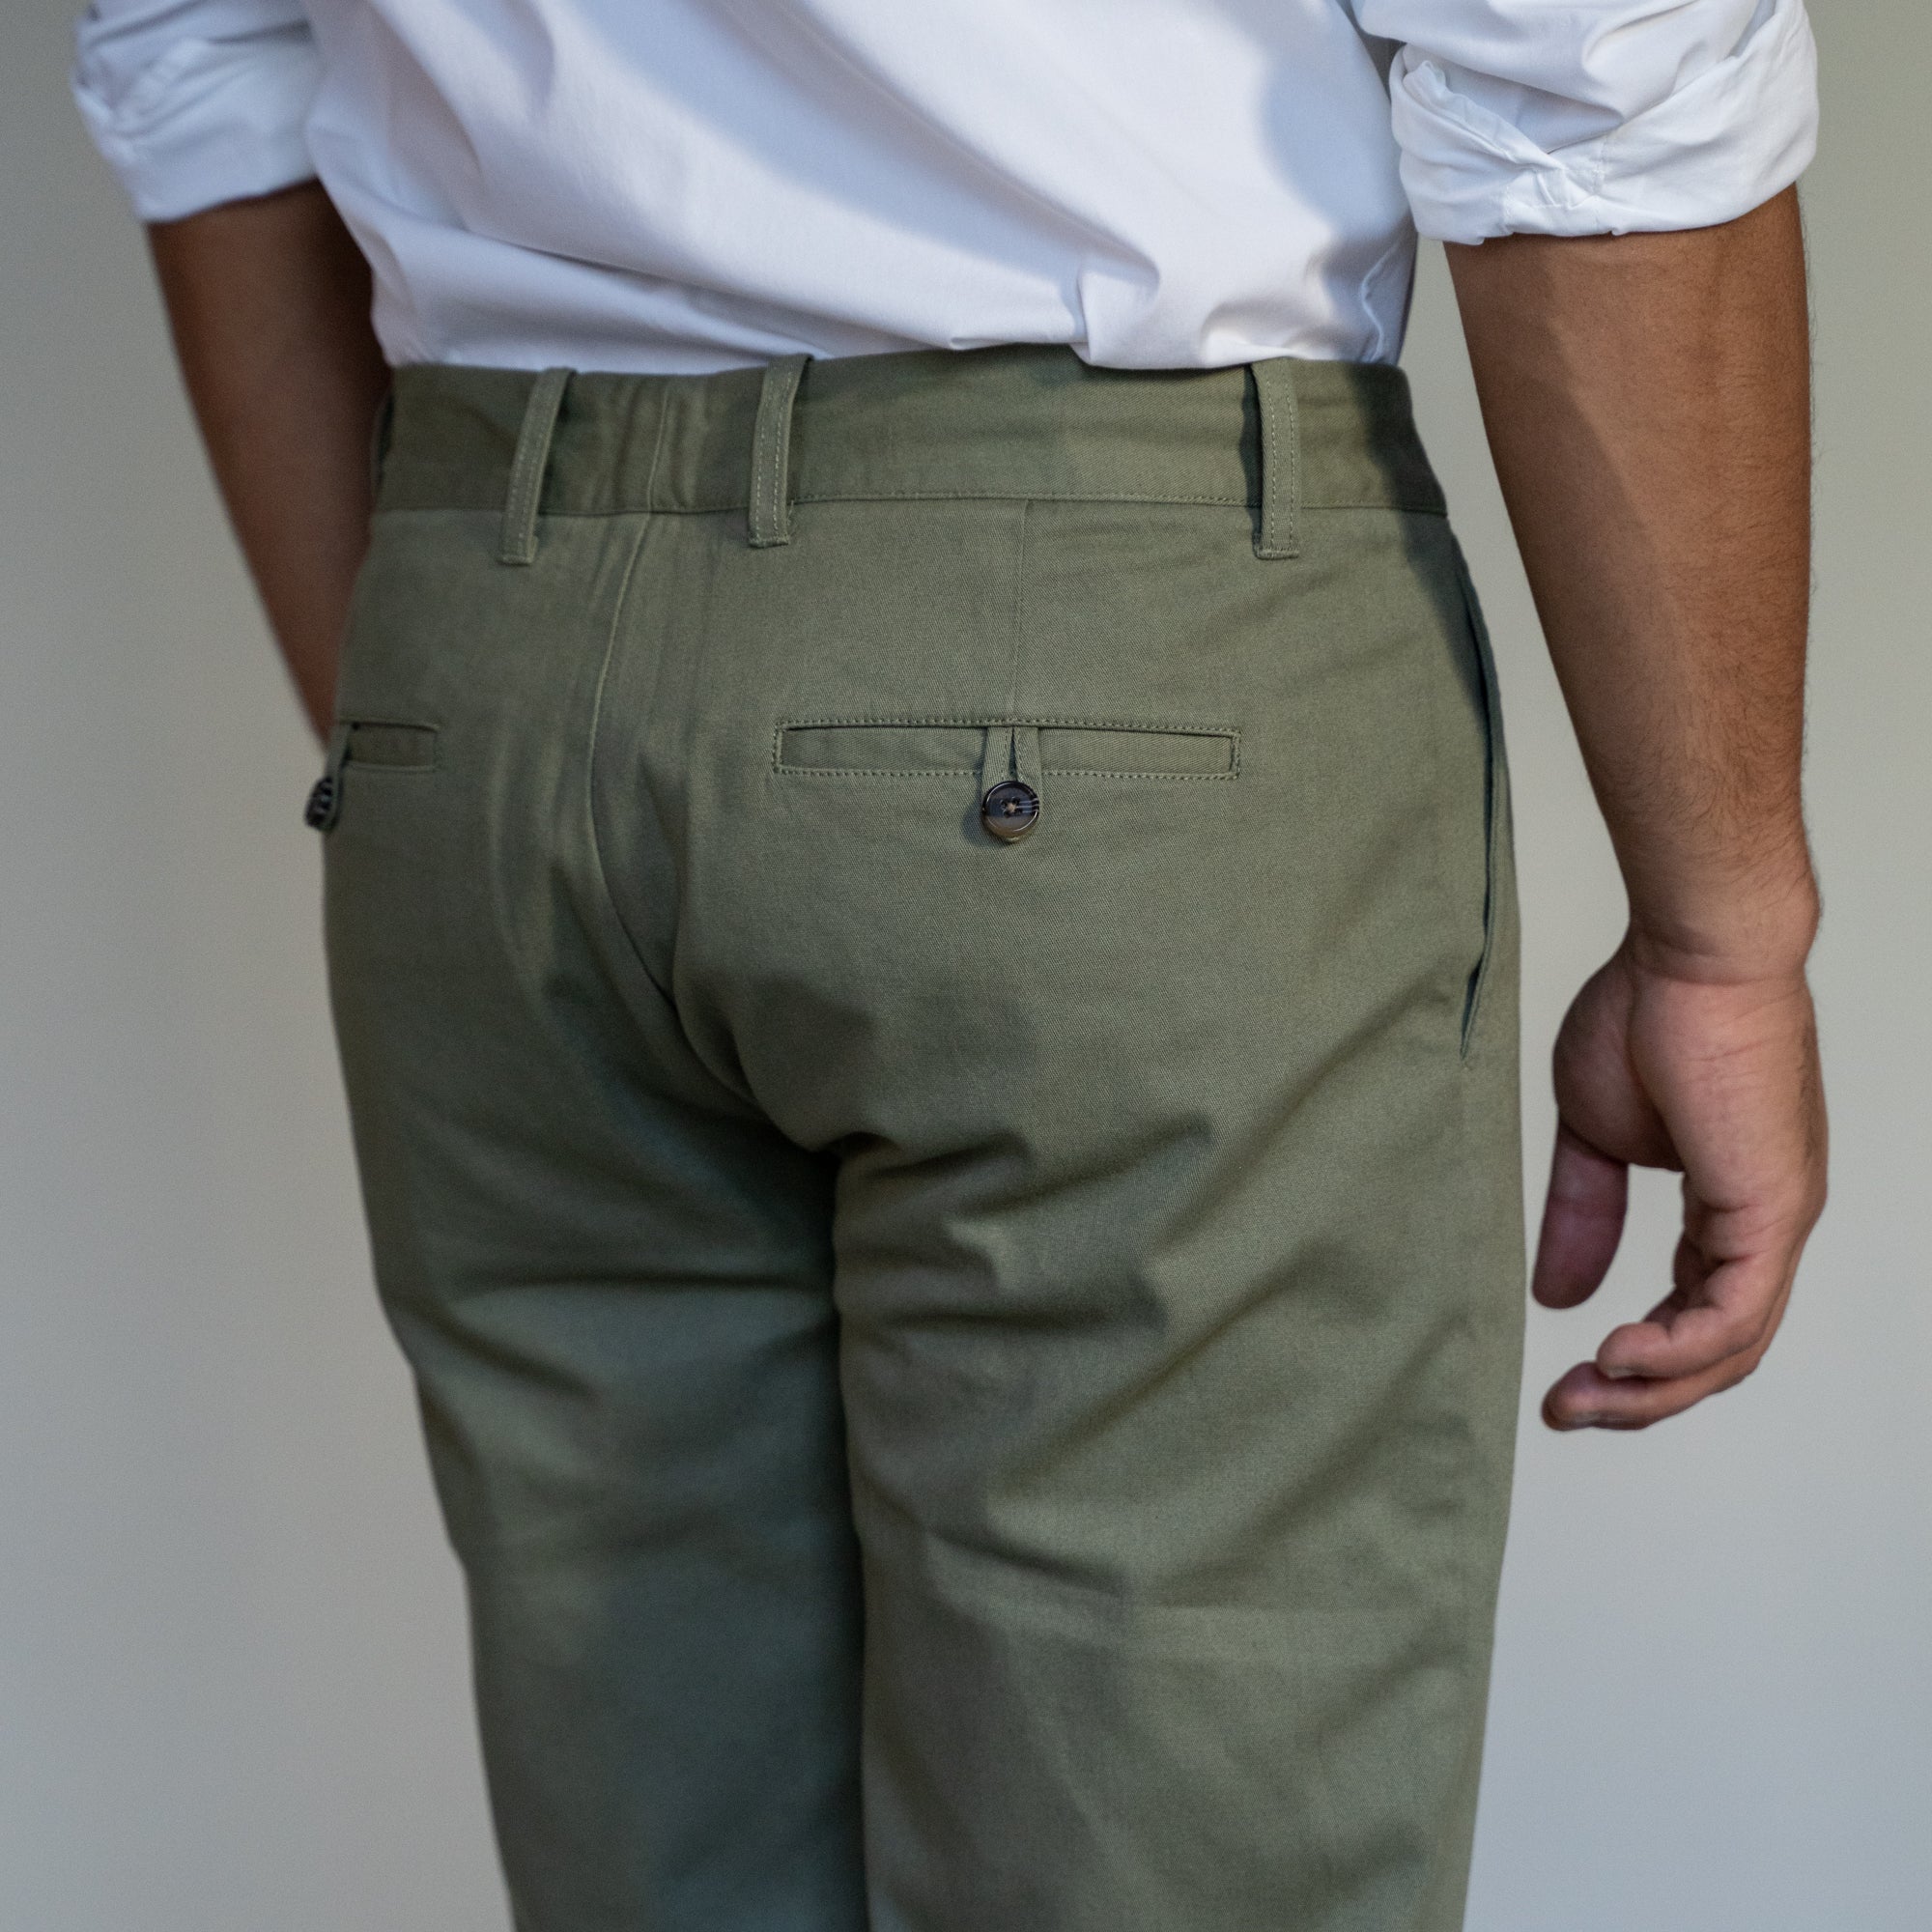 Stretch Chinos Standard Fit - Olive